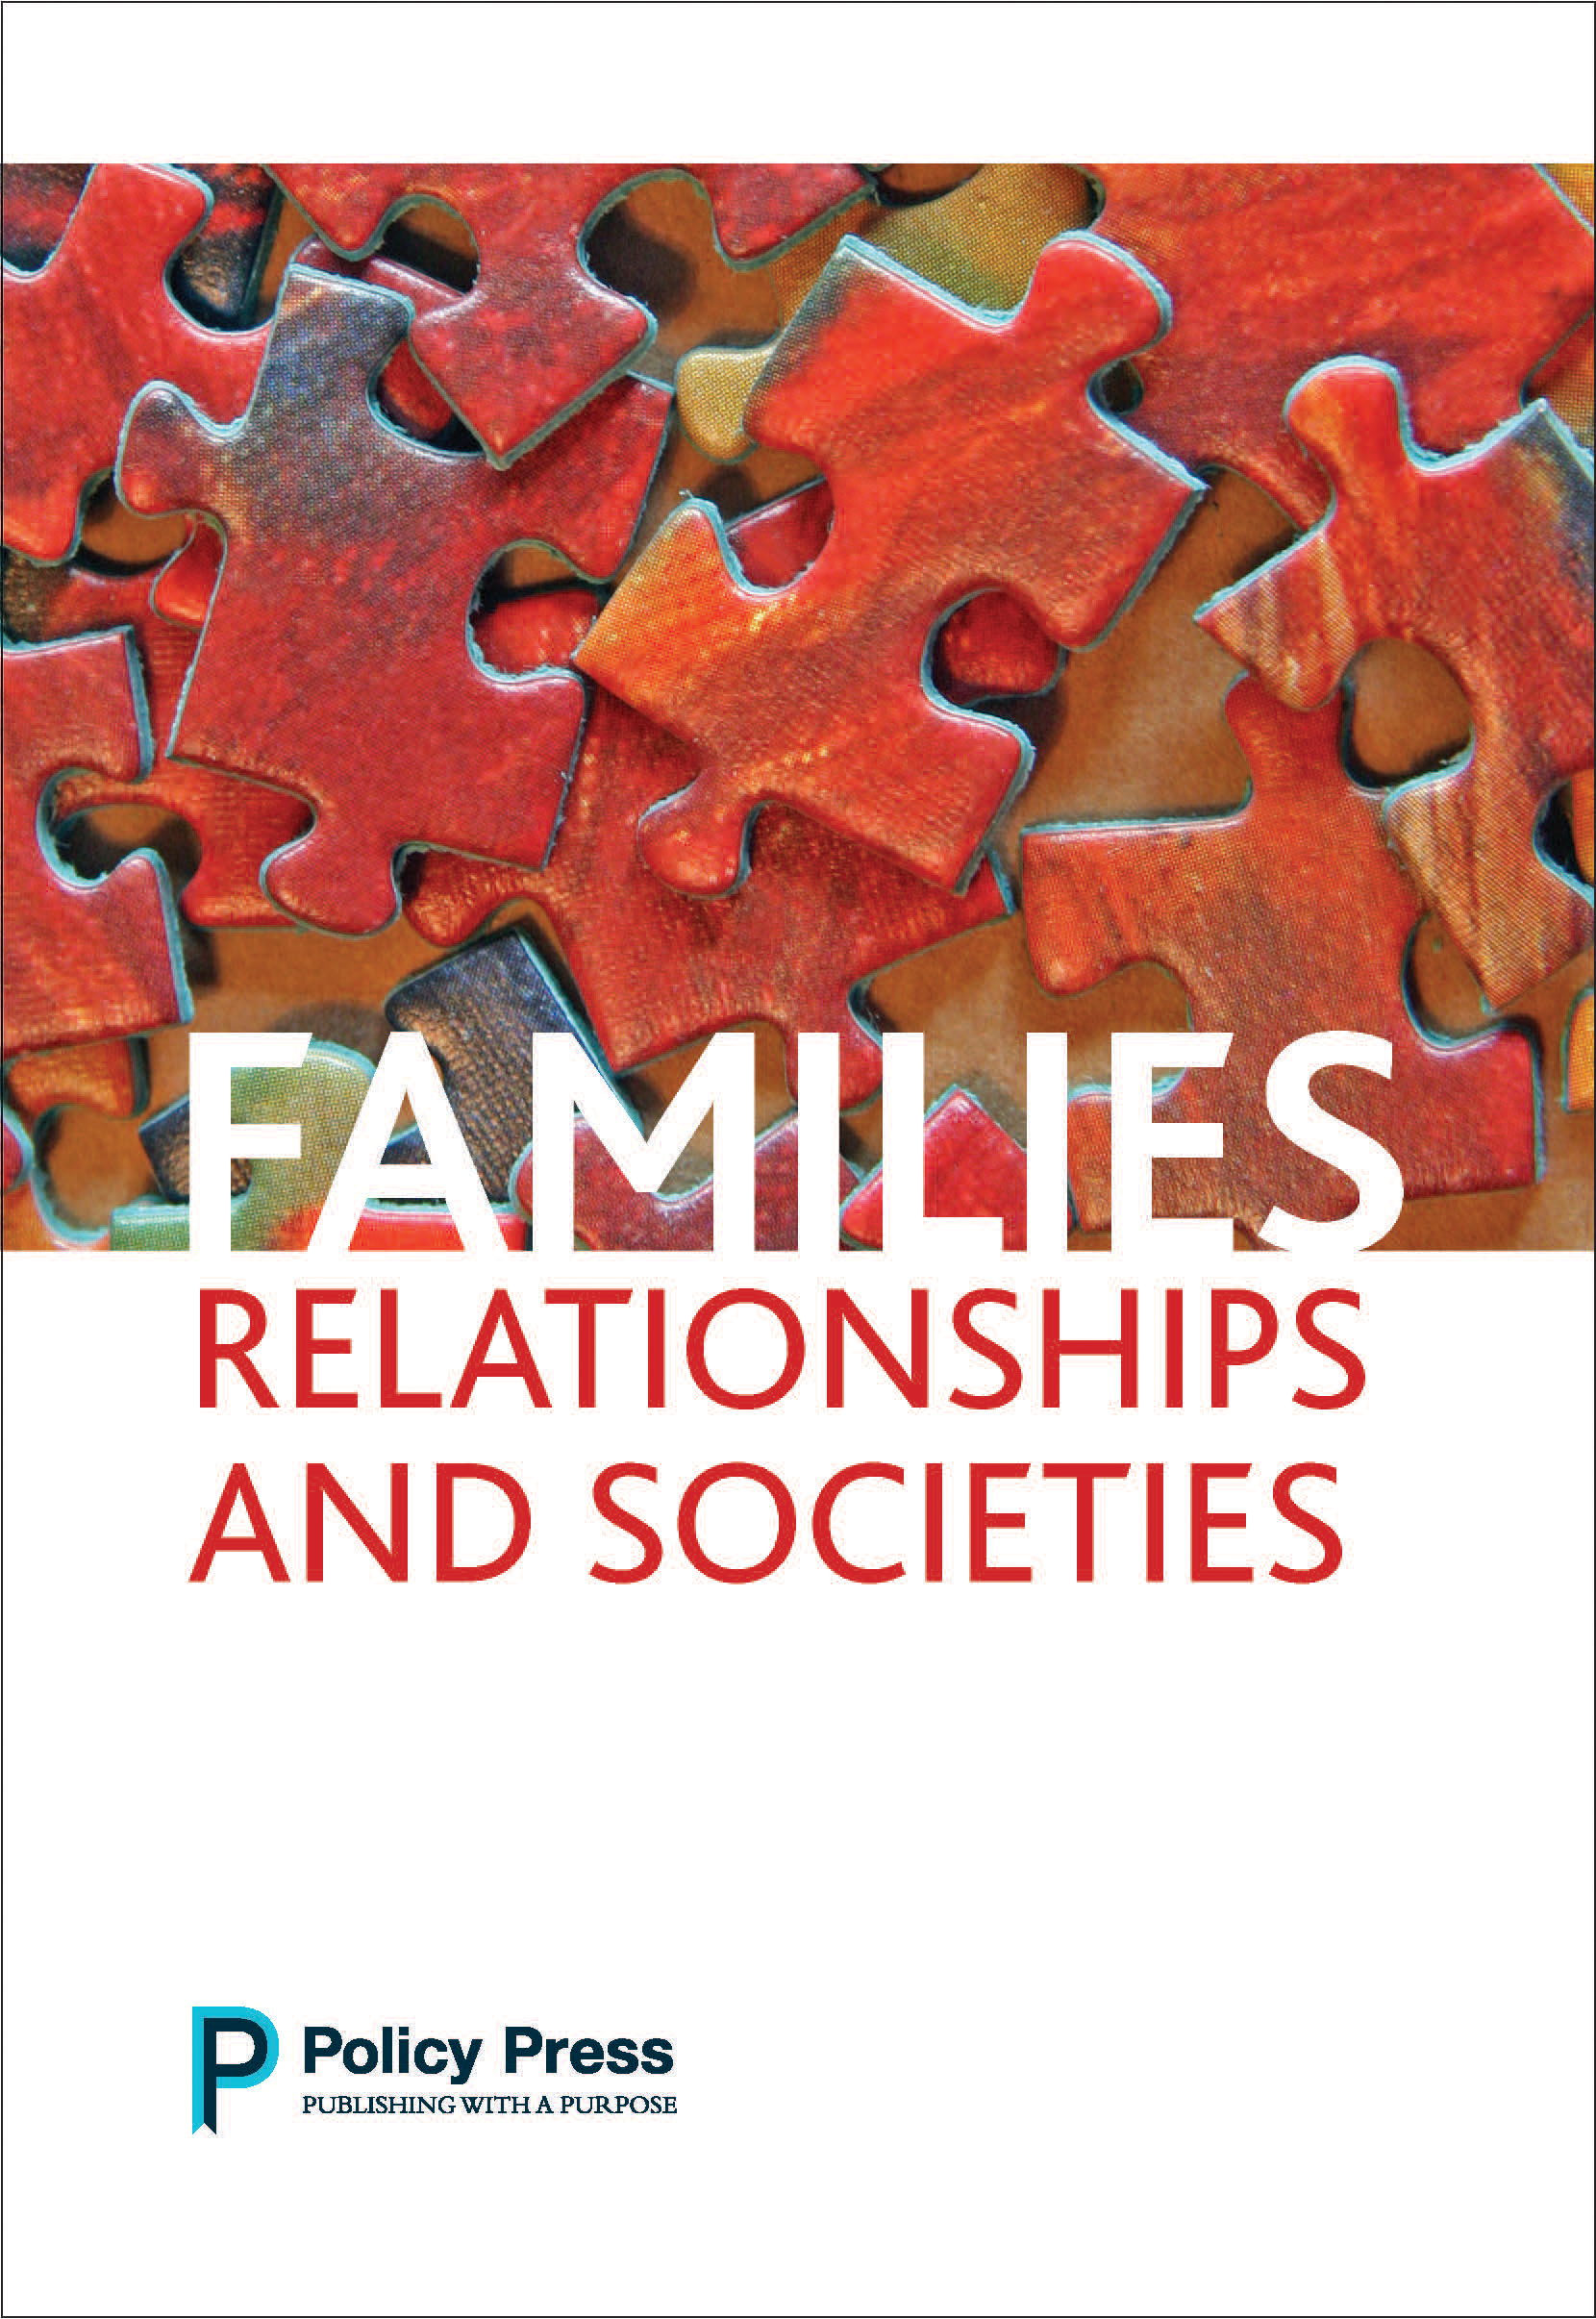 Families, relationships and societies cover